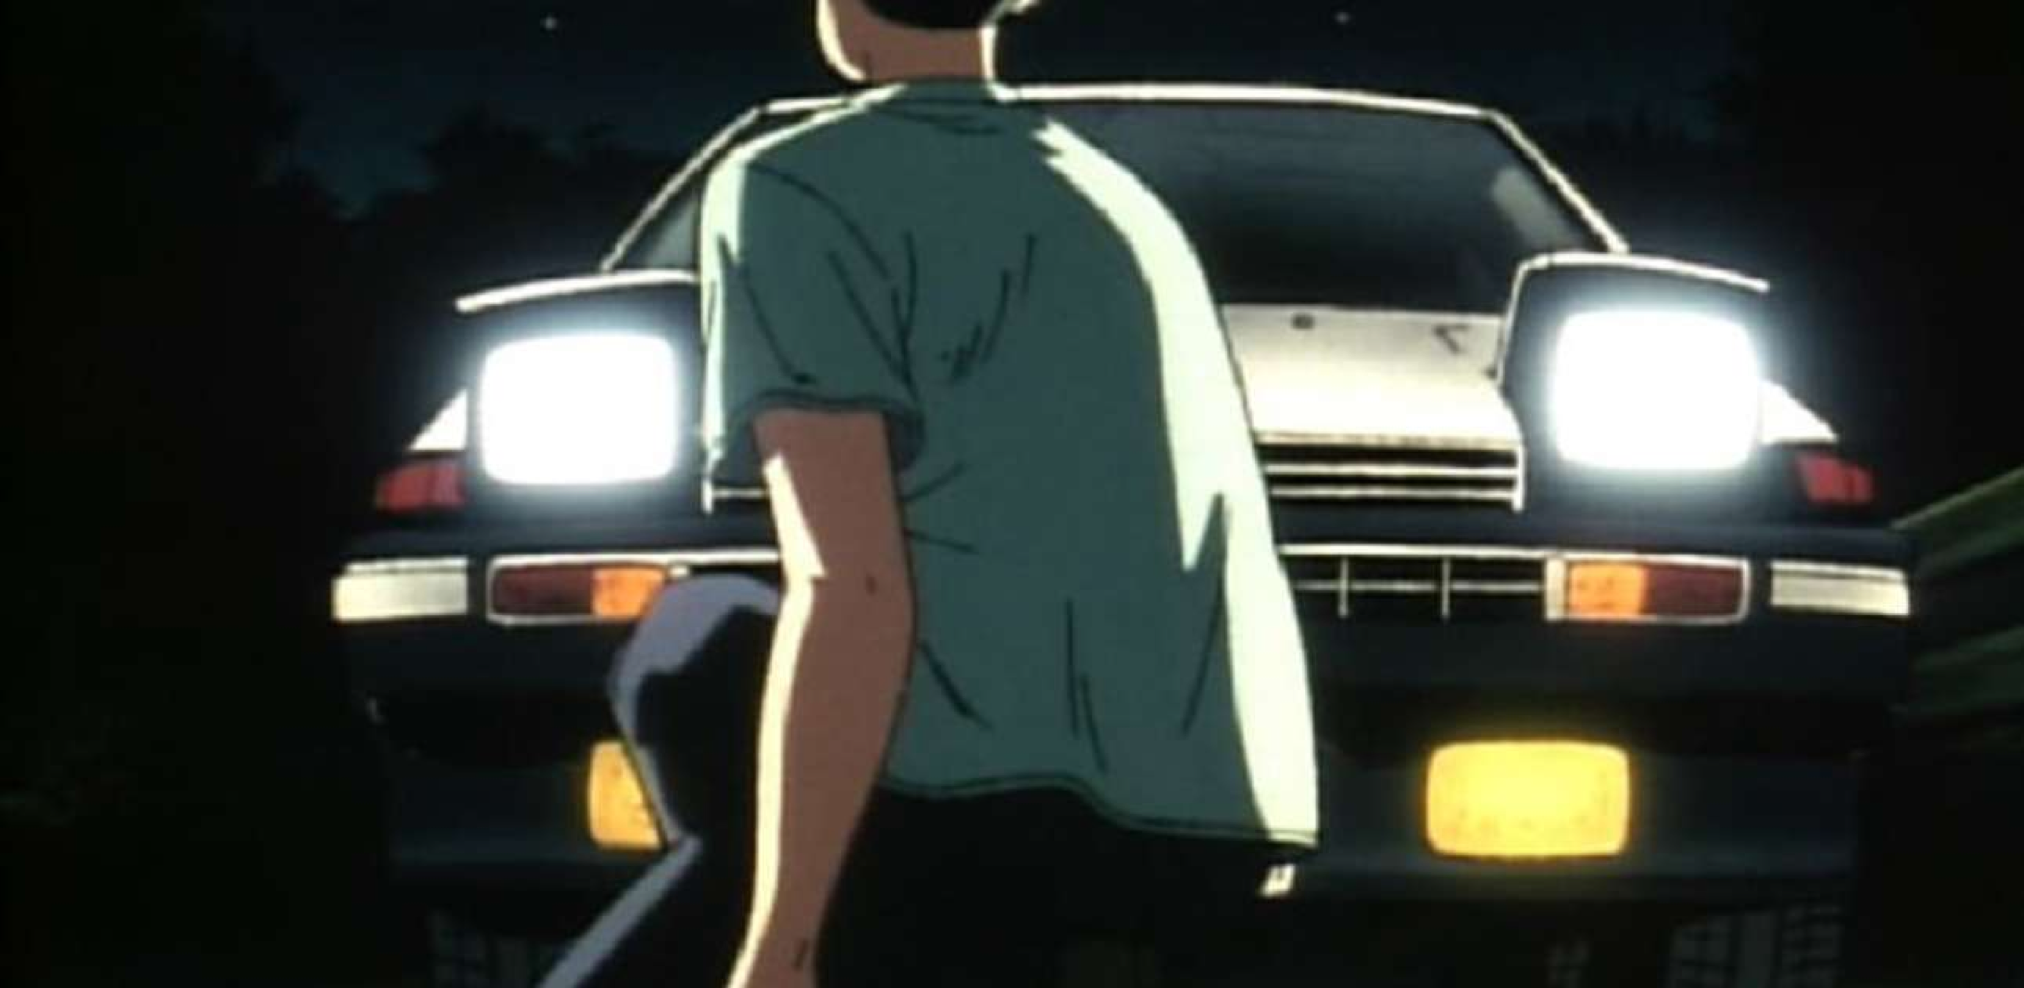 Race Hakone With Initial D Rental Cars - Interest - Anime News Network